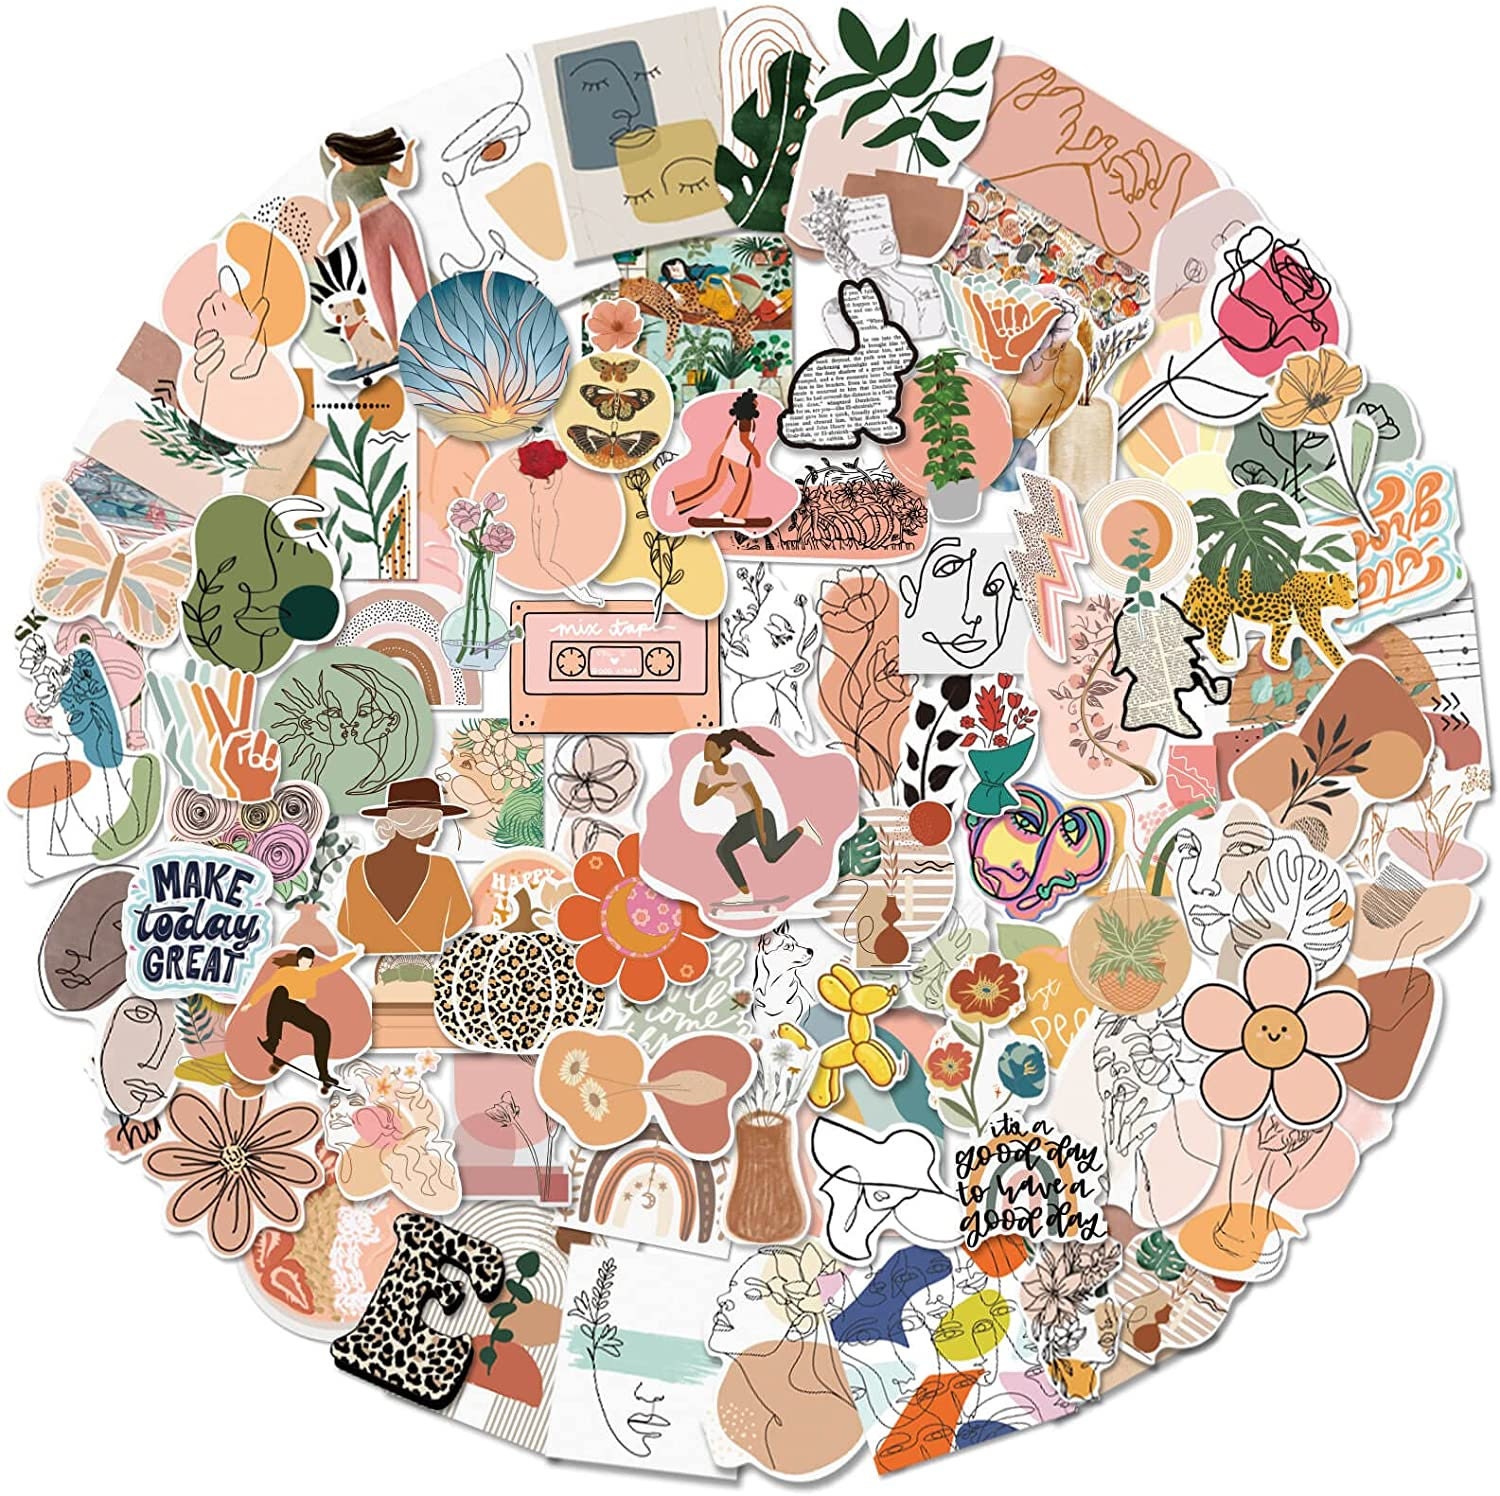 50-500 sticker Pack, boho Stickers, Stickers shipping Cute